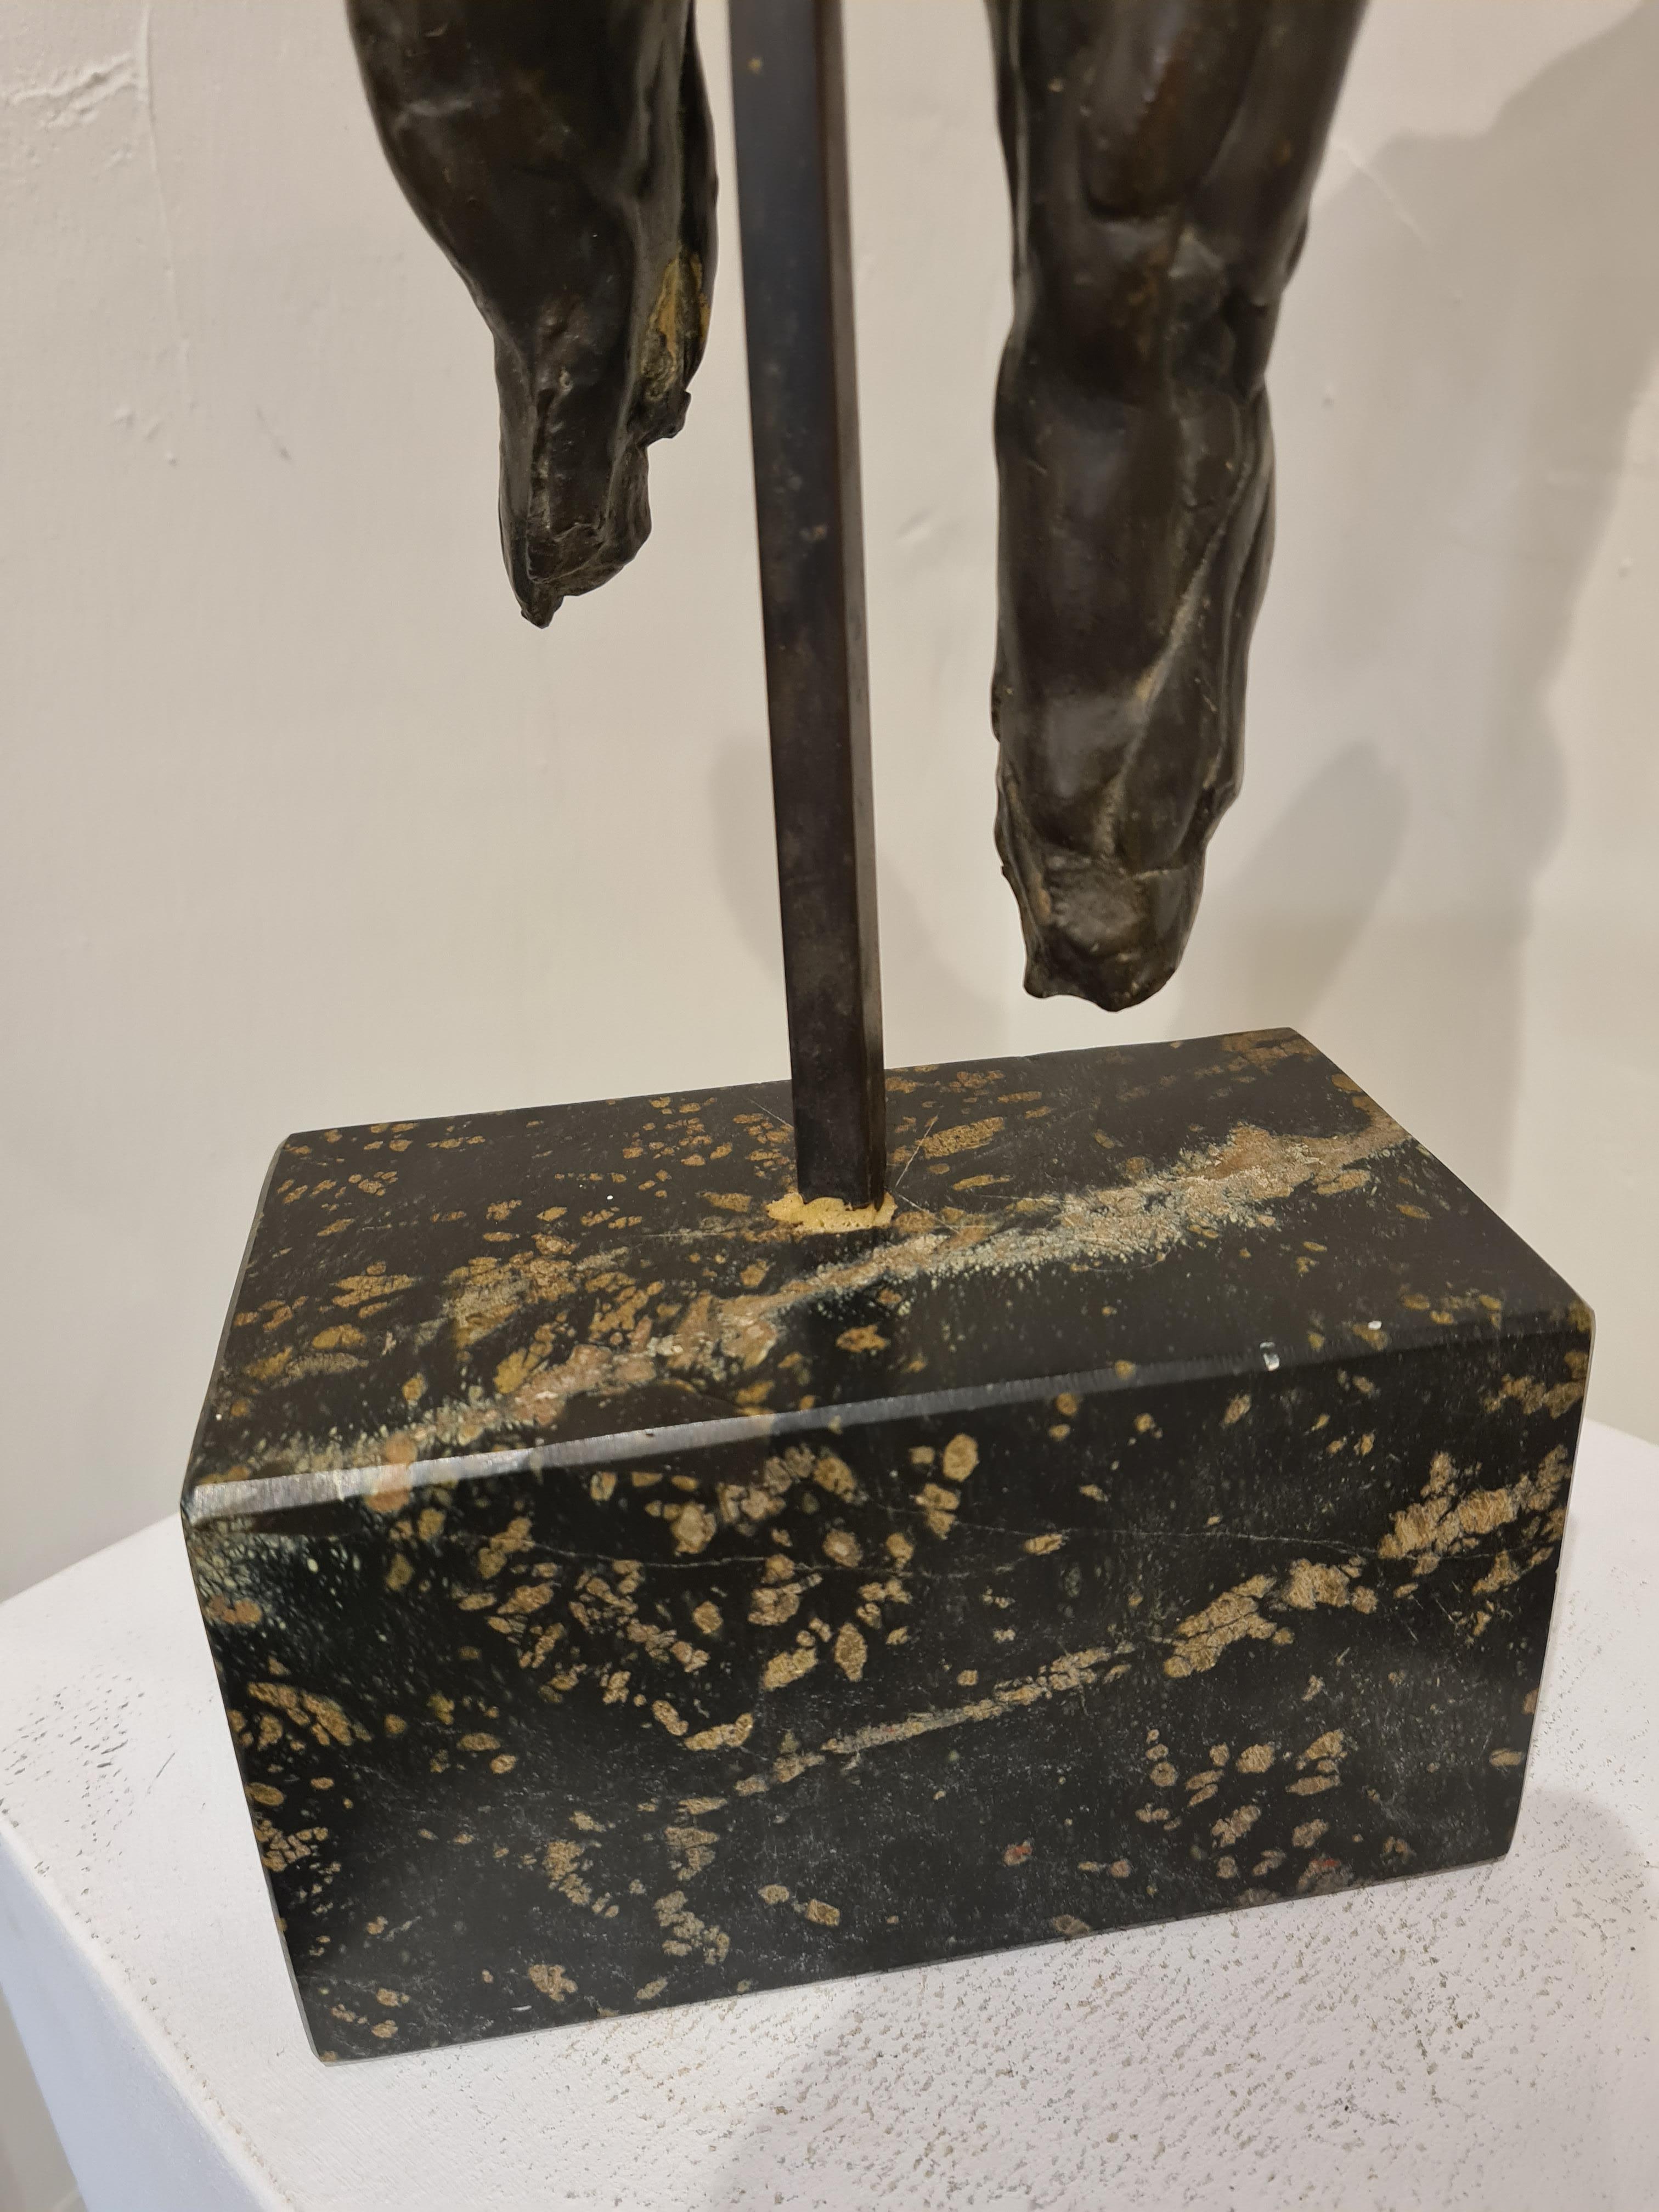 French Mid 20th Century bronze figure of a man presented on an iron 'tige' and marble base.

The sculpture is not signed but was purchased from Nice, France, in the 1970s as a work by 'Franta'. it is however reminiscent of other artists of this